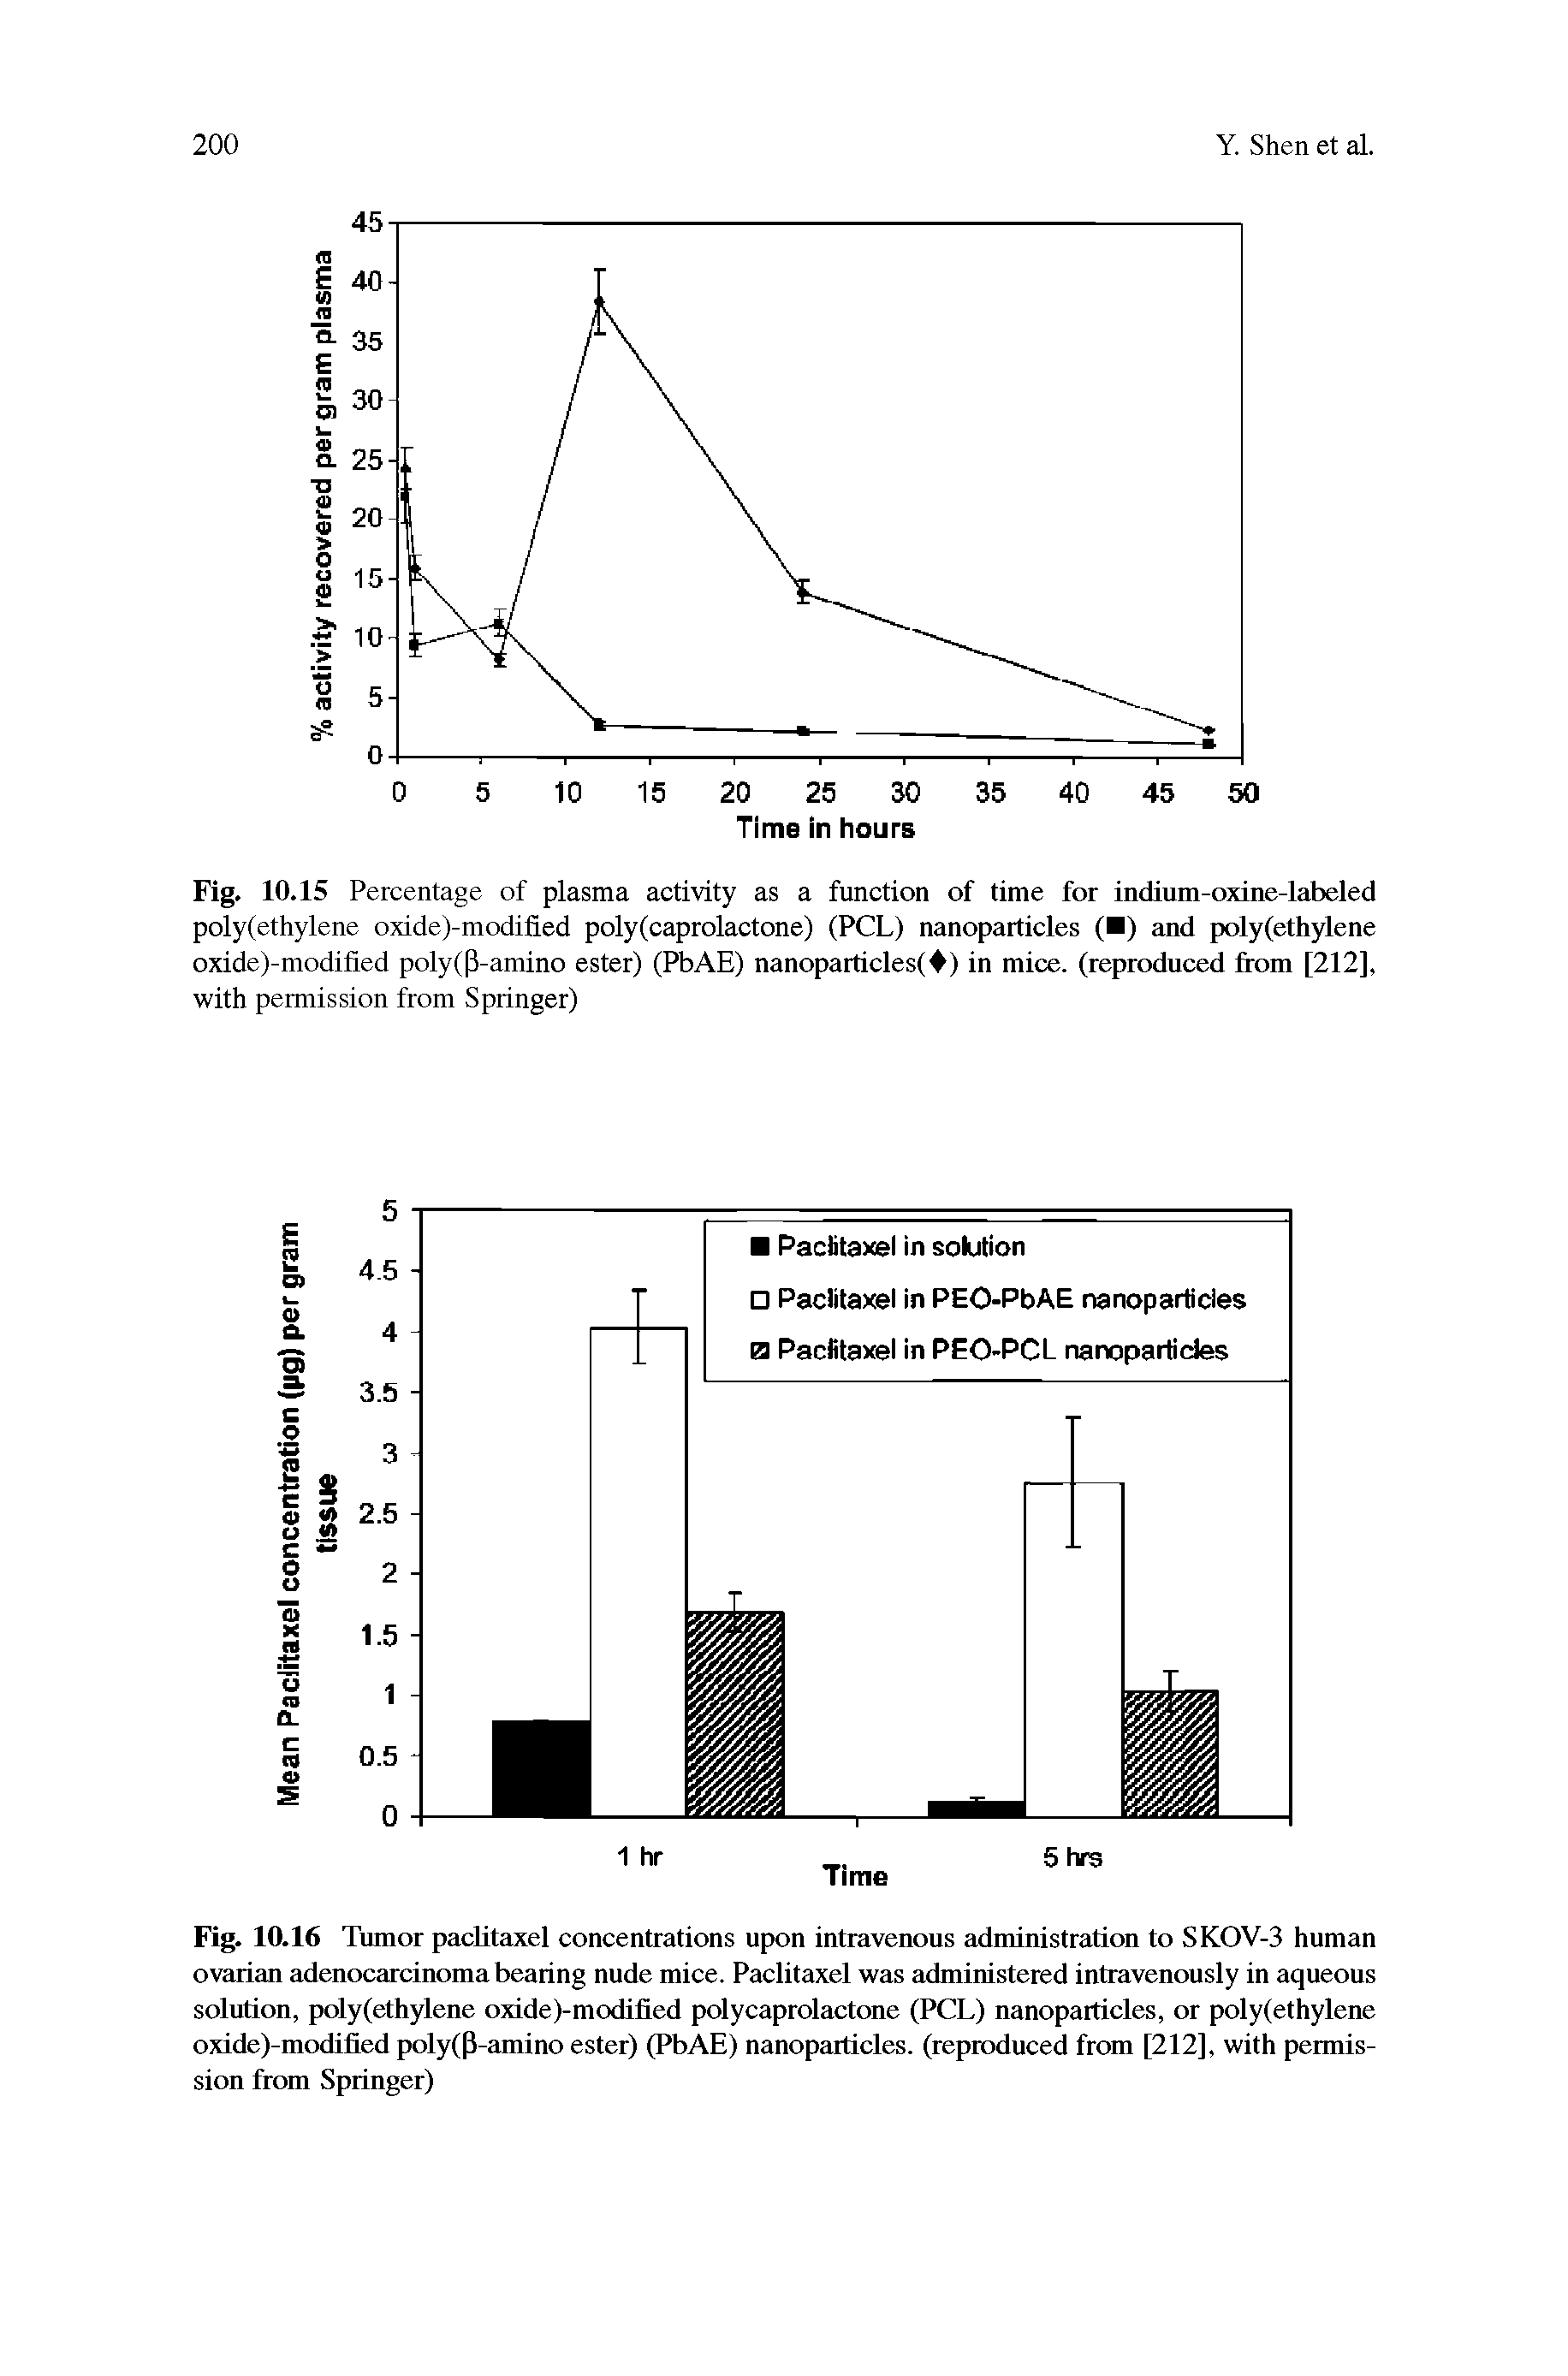 Fig. 10.15 Percentage of plasma activity as a function of time for indium-oxine-labeled poly(ethylene oxide)-modified poly(caprolactone) (PCL) nanoparticles ( ) and poly(ethylene oxide)-modified poly( 3-amino ester) (PbAE) nanoparticles( ) in mice, (reproduced from [212], with permission from Springer)...